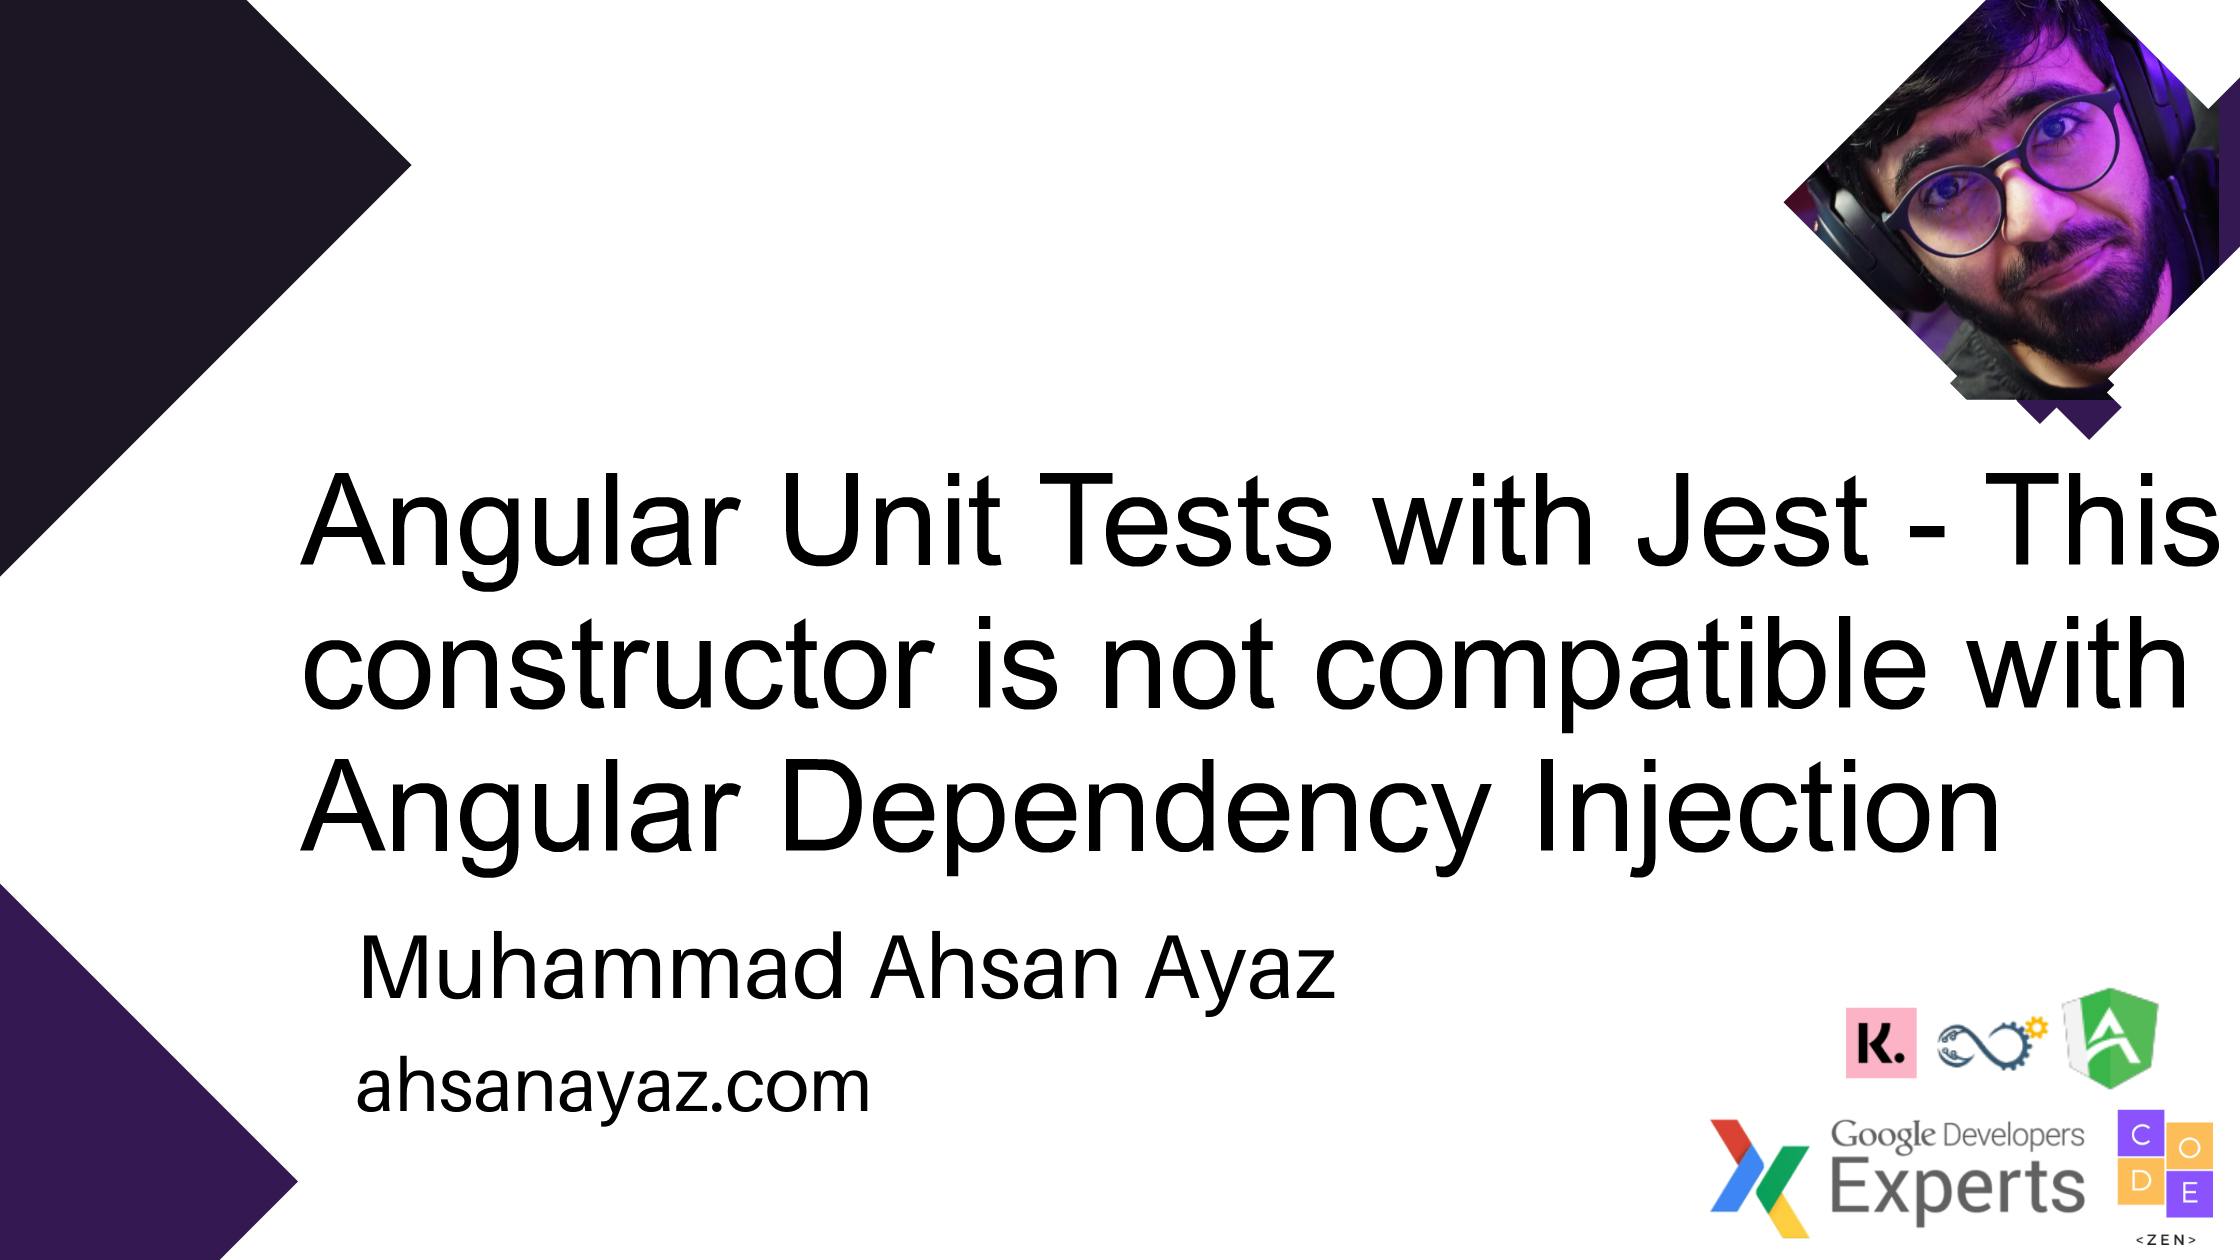 angular-unit-tests-constructor-not-compatible-with-angular-dependency-injection